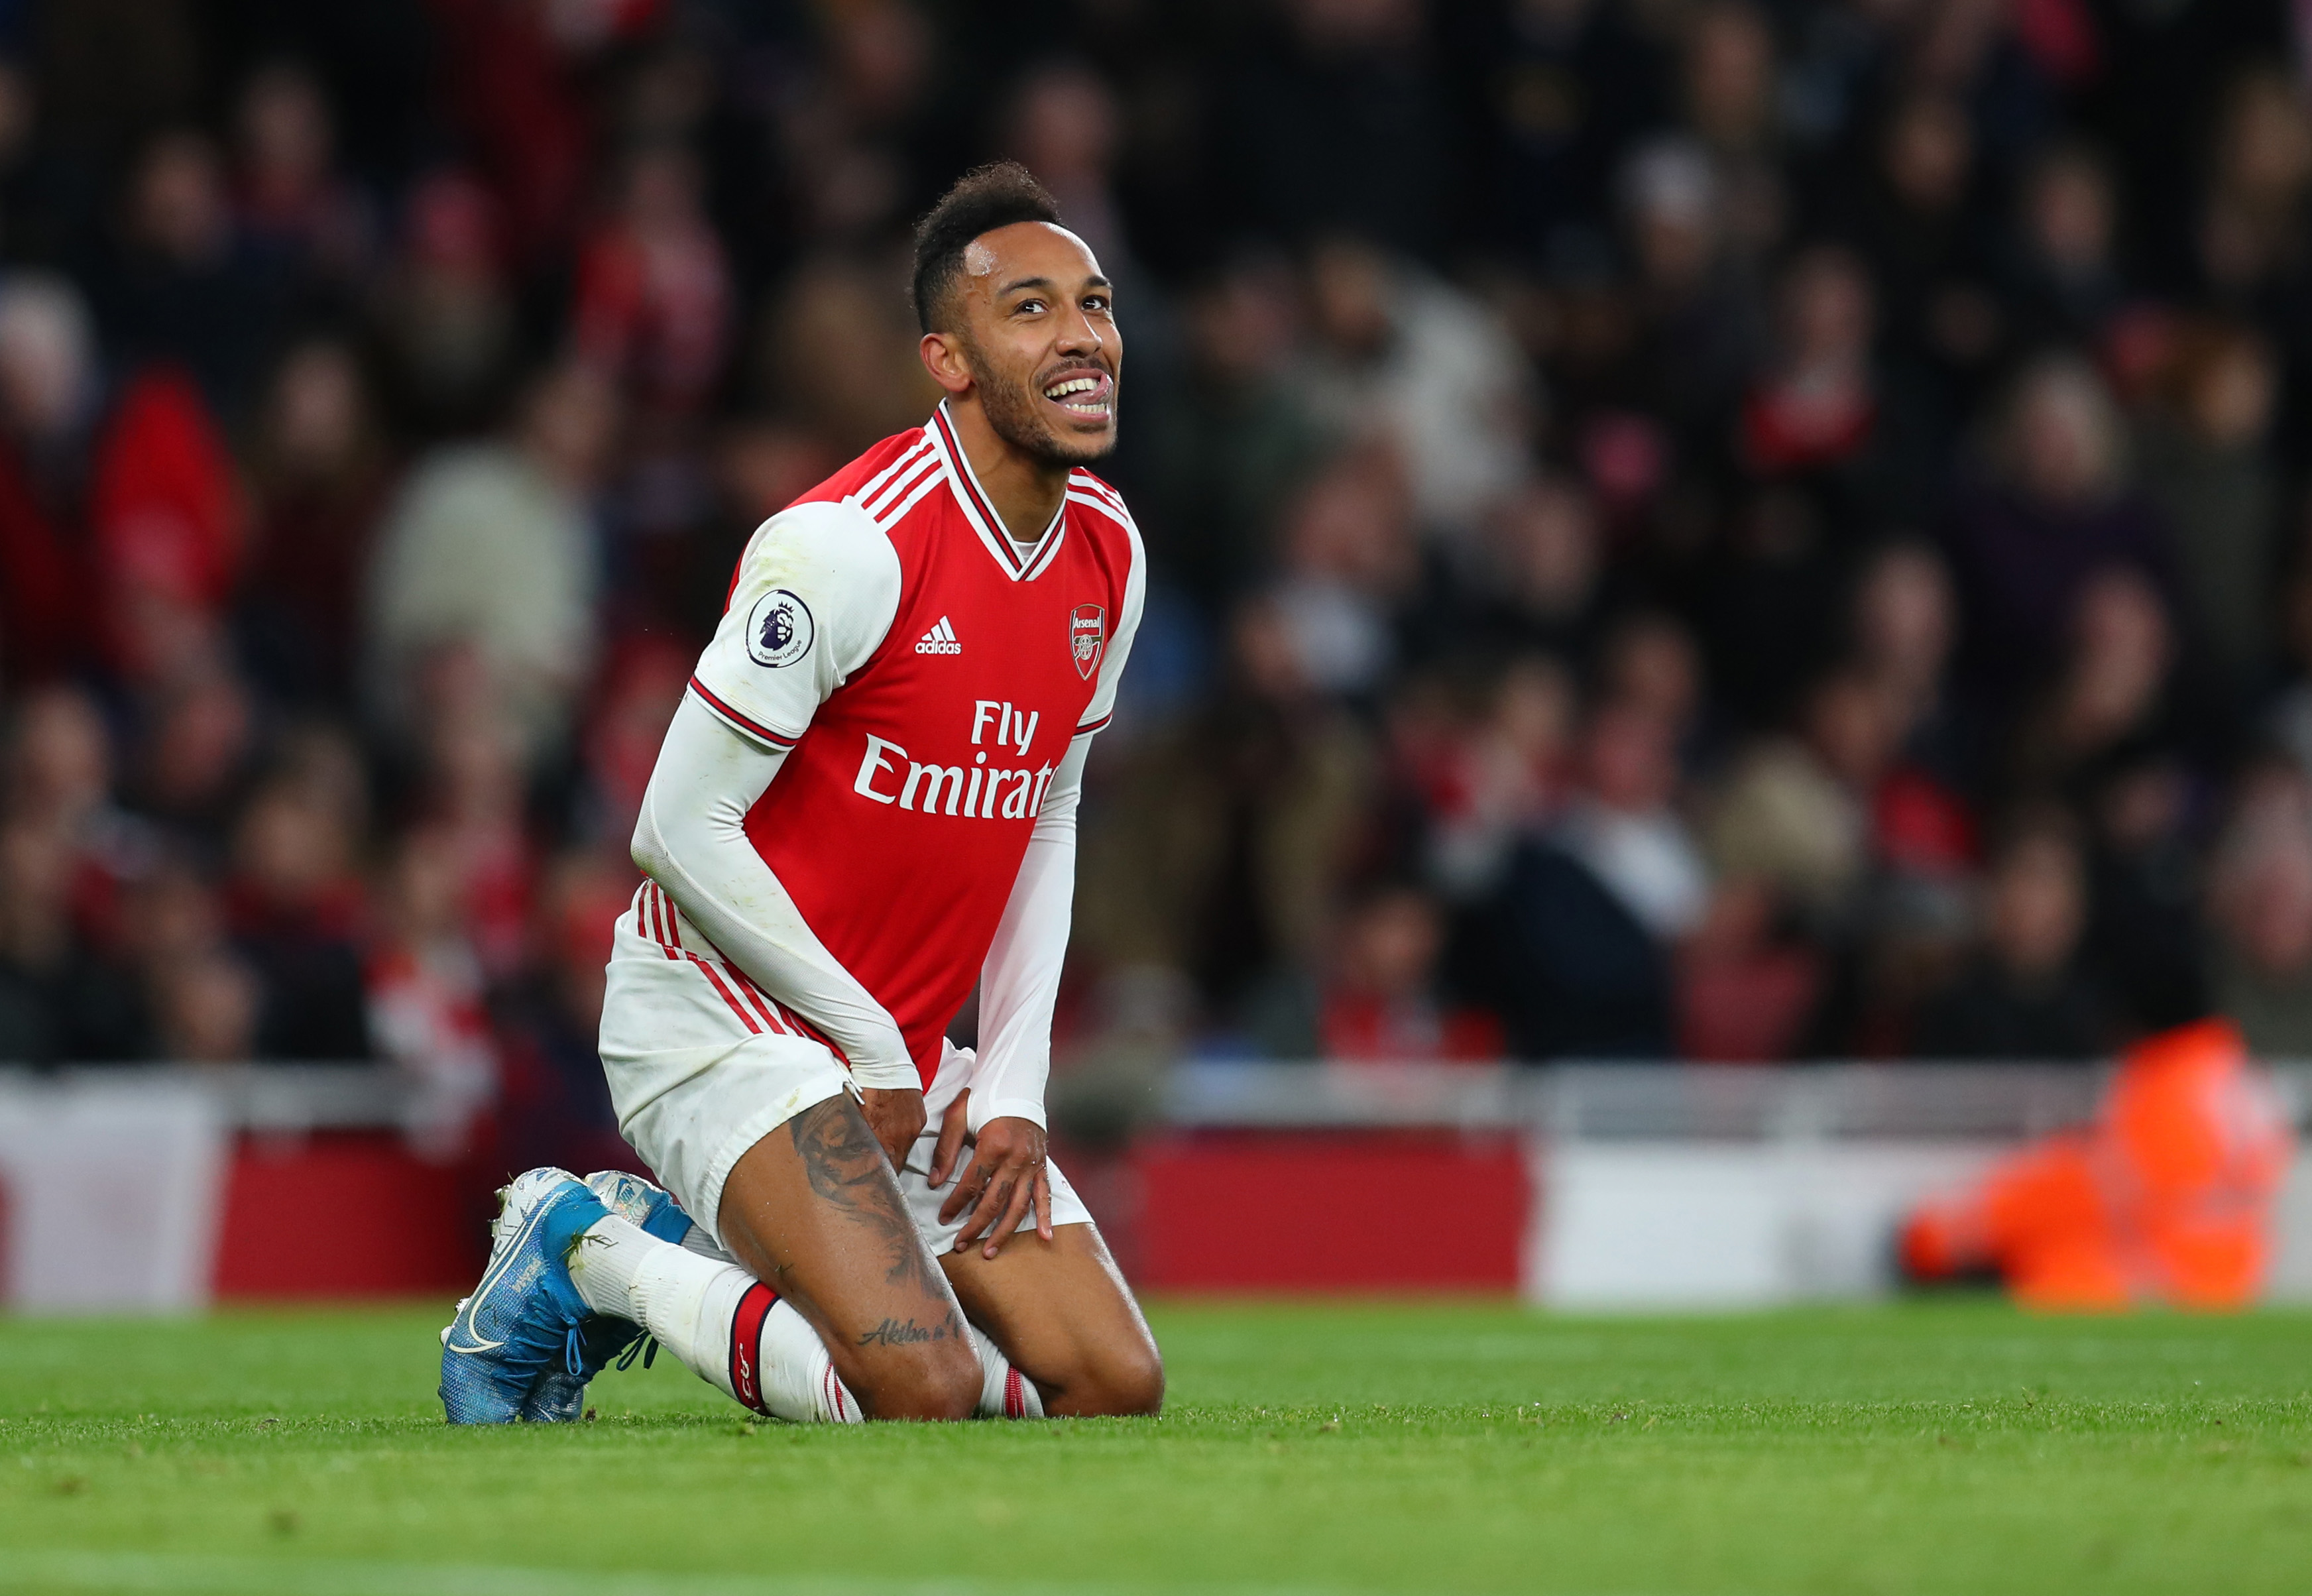 Aubameyang has his heart set on a move to Barcelona. (Photo by Catherine Ivill/Getty Images)